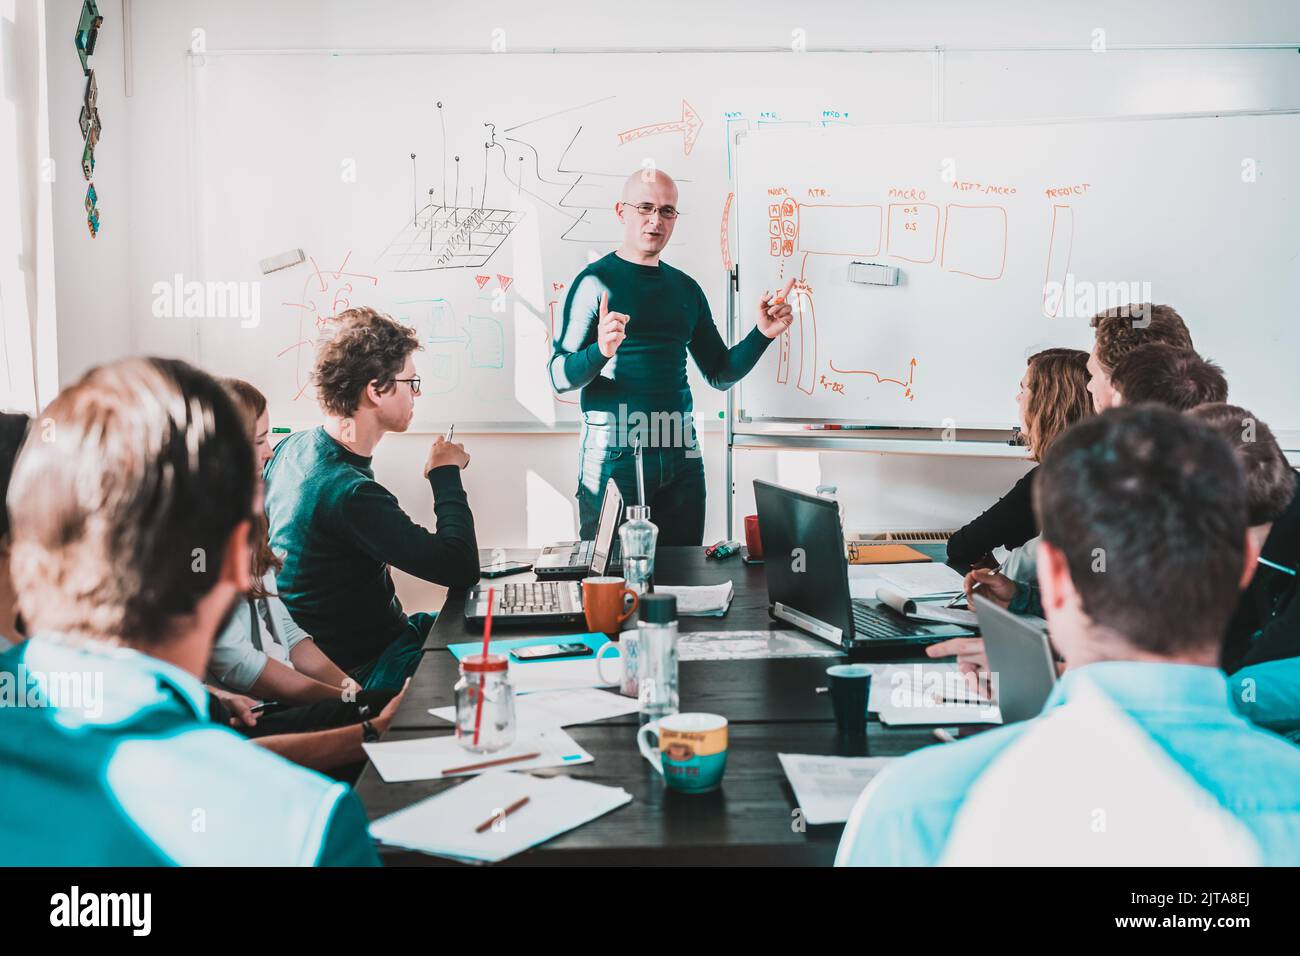 Informal IT business startup company meeting. Team leader discussing and brainstorming new project and ideas with colleagues. Startup business and Stock Photo